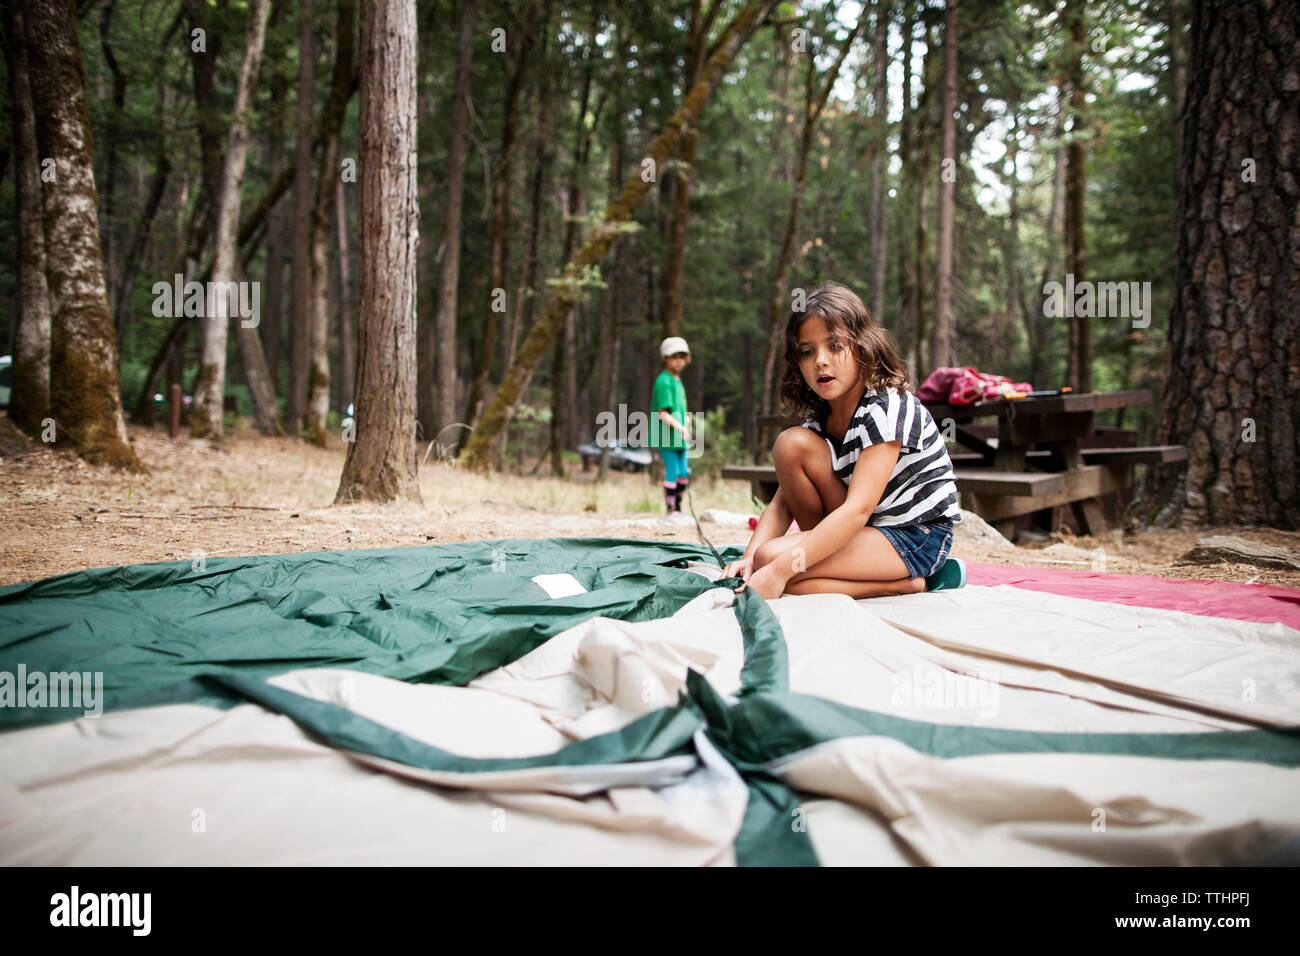 Girl setting up tent in forest Stock Photo